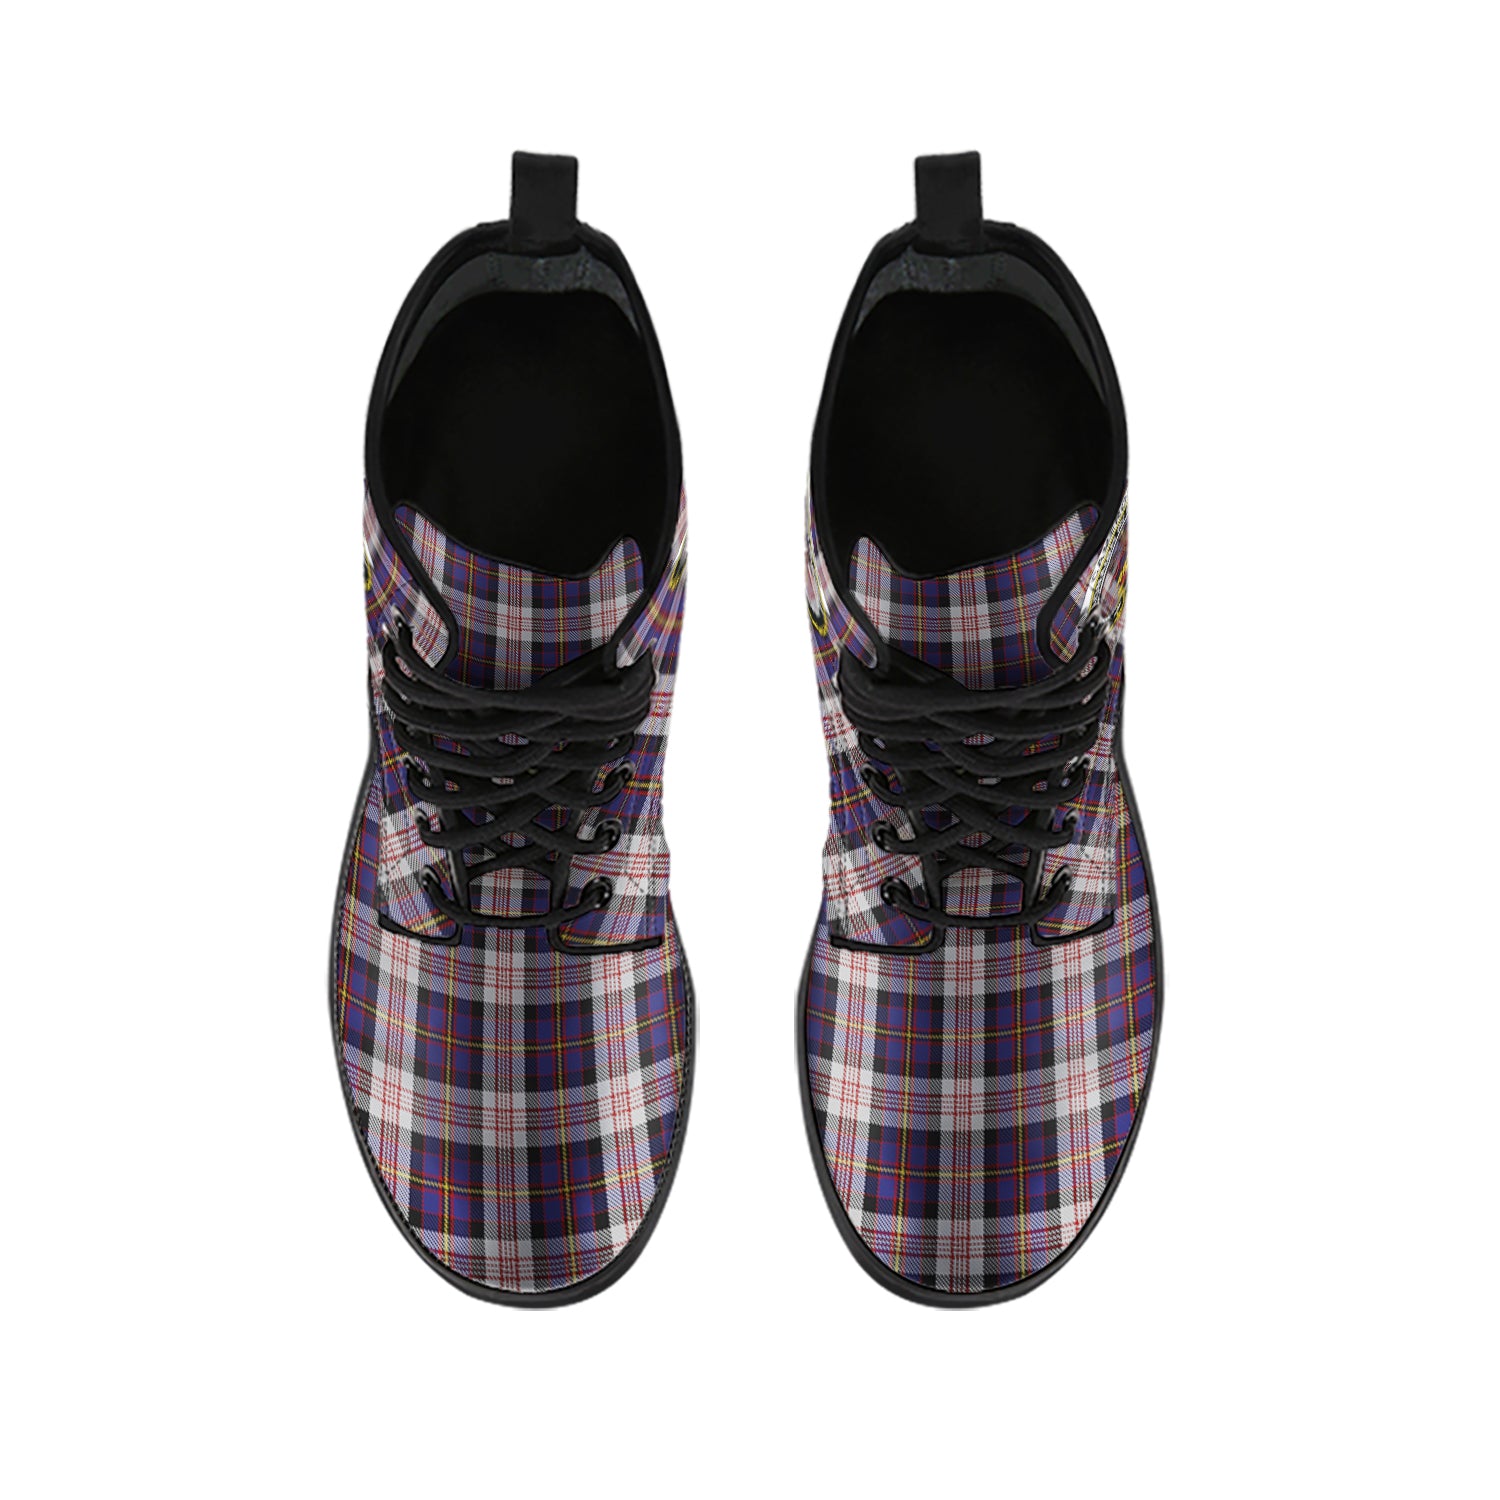 cameron-of-erracht-dress-tartan-leather-boots-with-family-crest